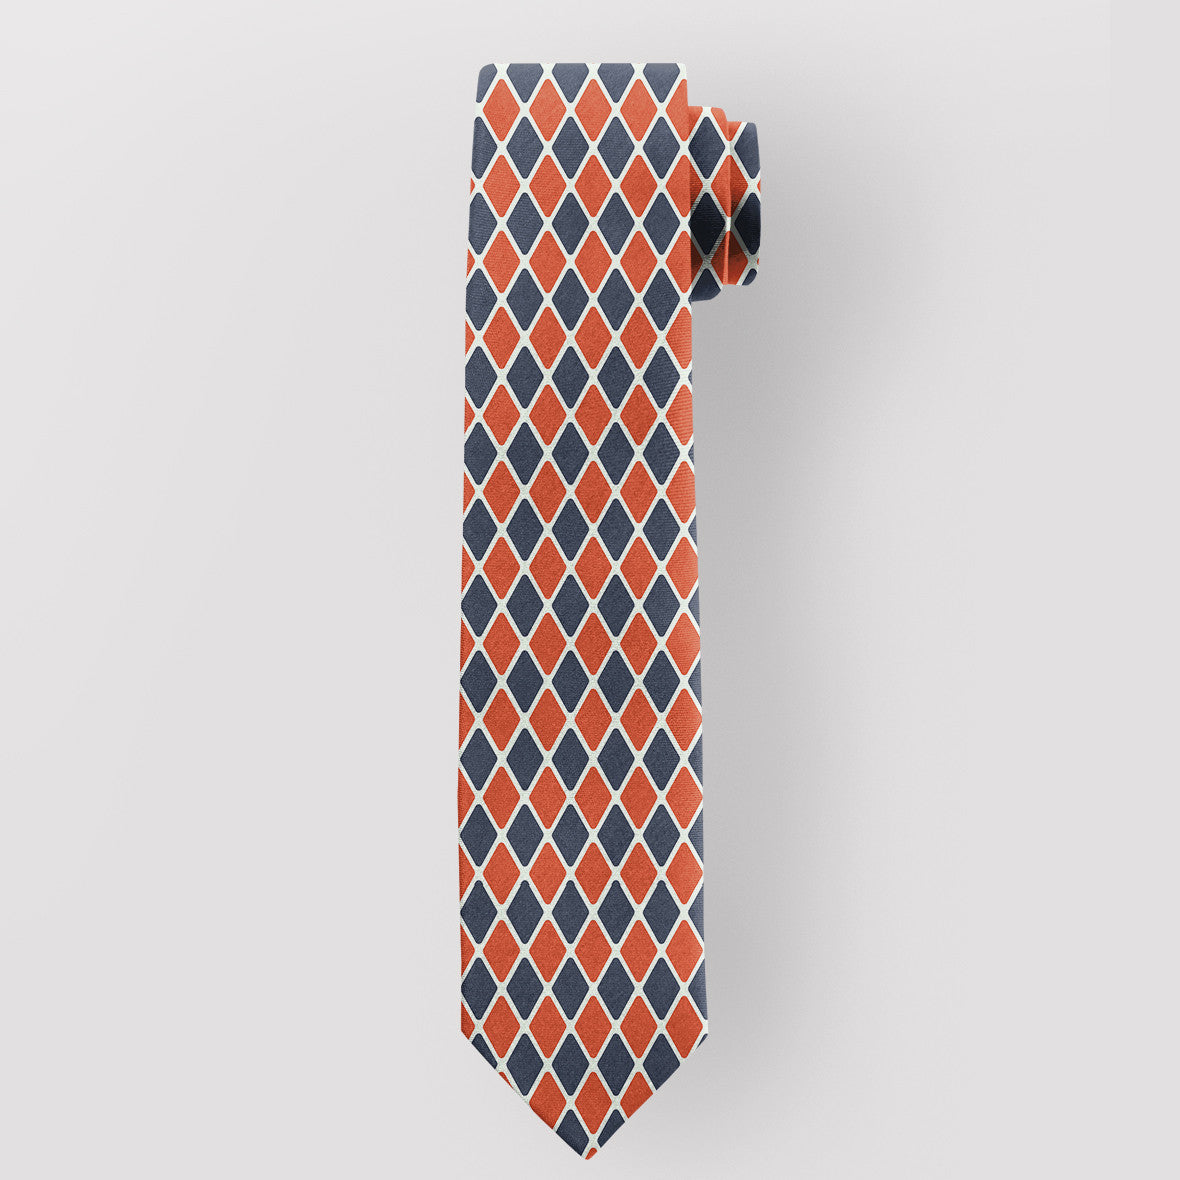 Download 11+ Neck Tie Mockup Free Background Yellowimages - Free PSD Mockup Templates